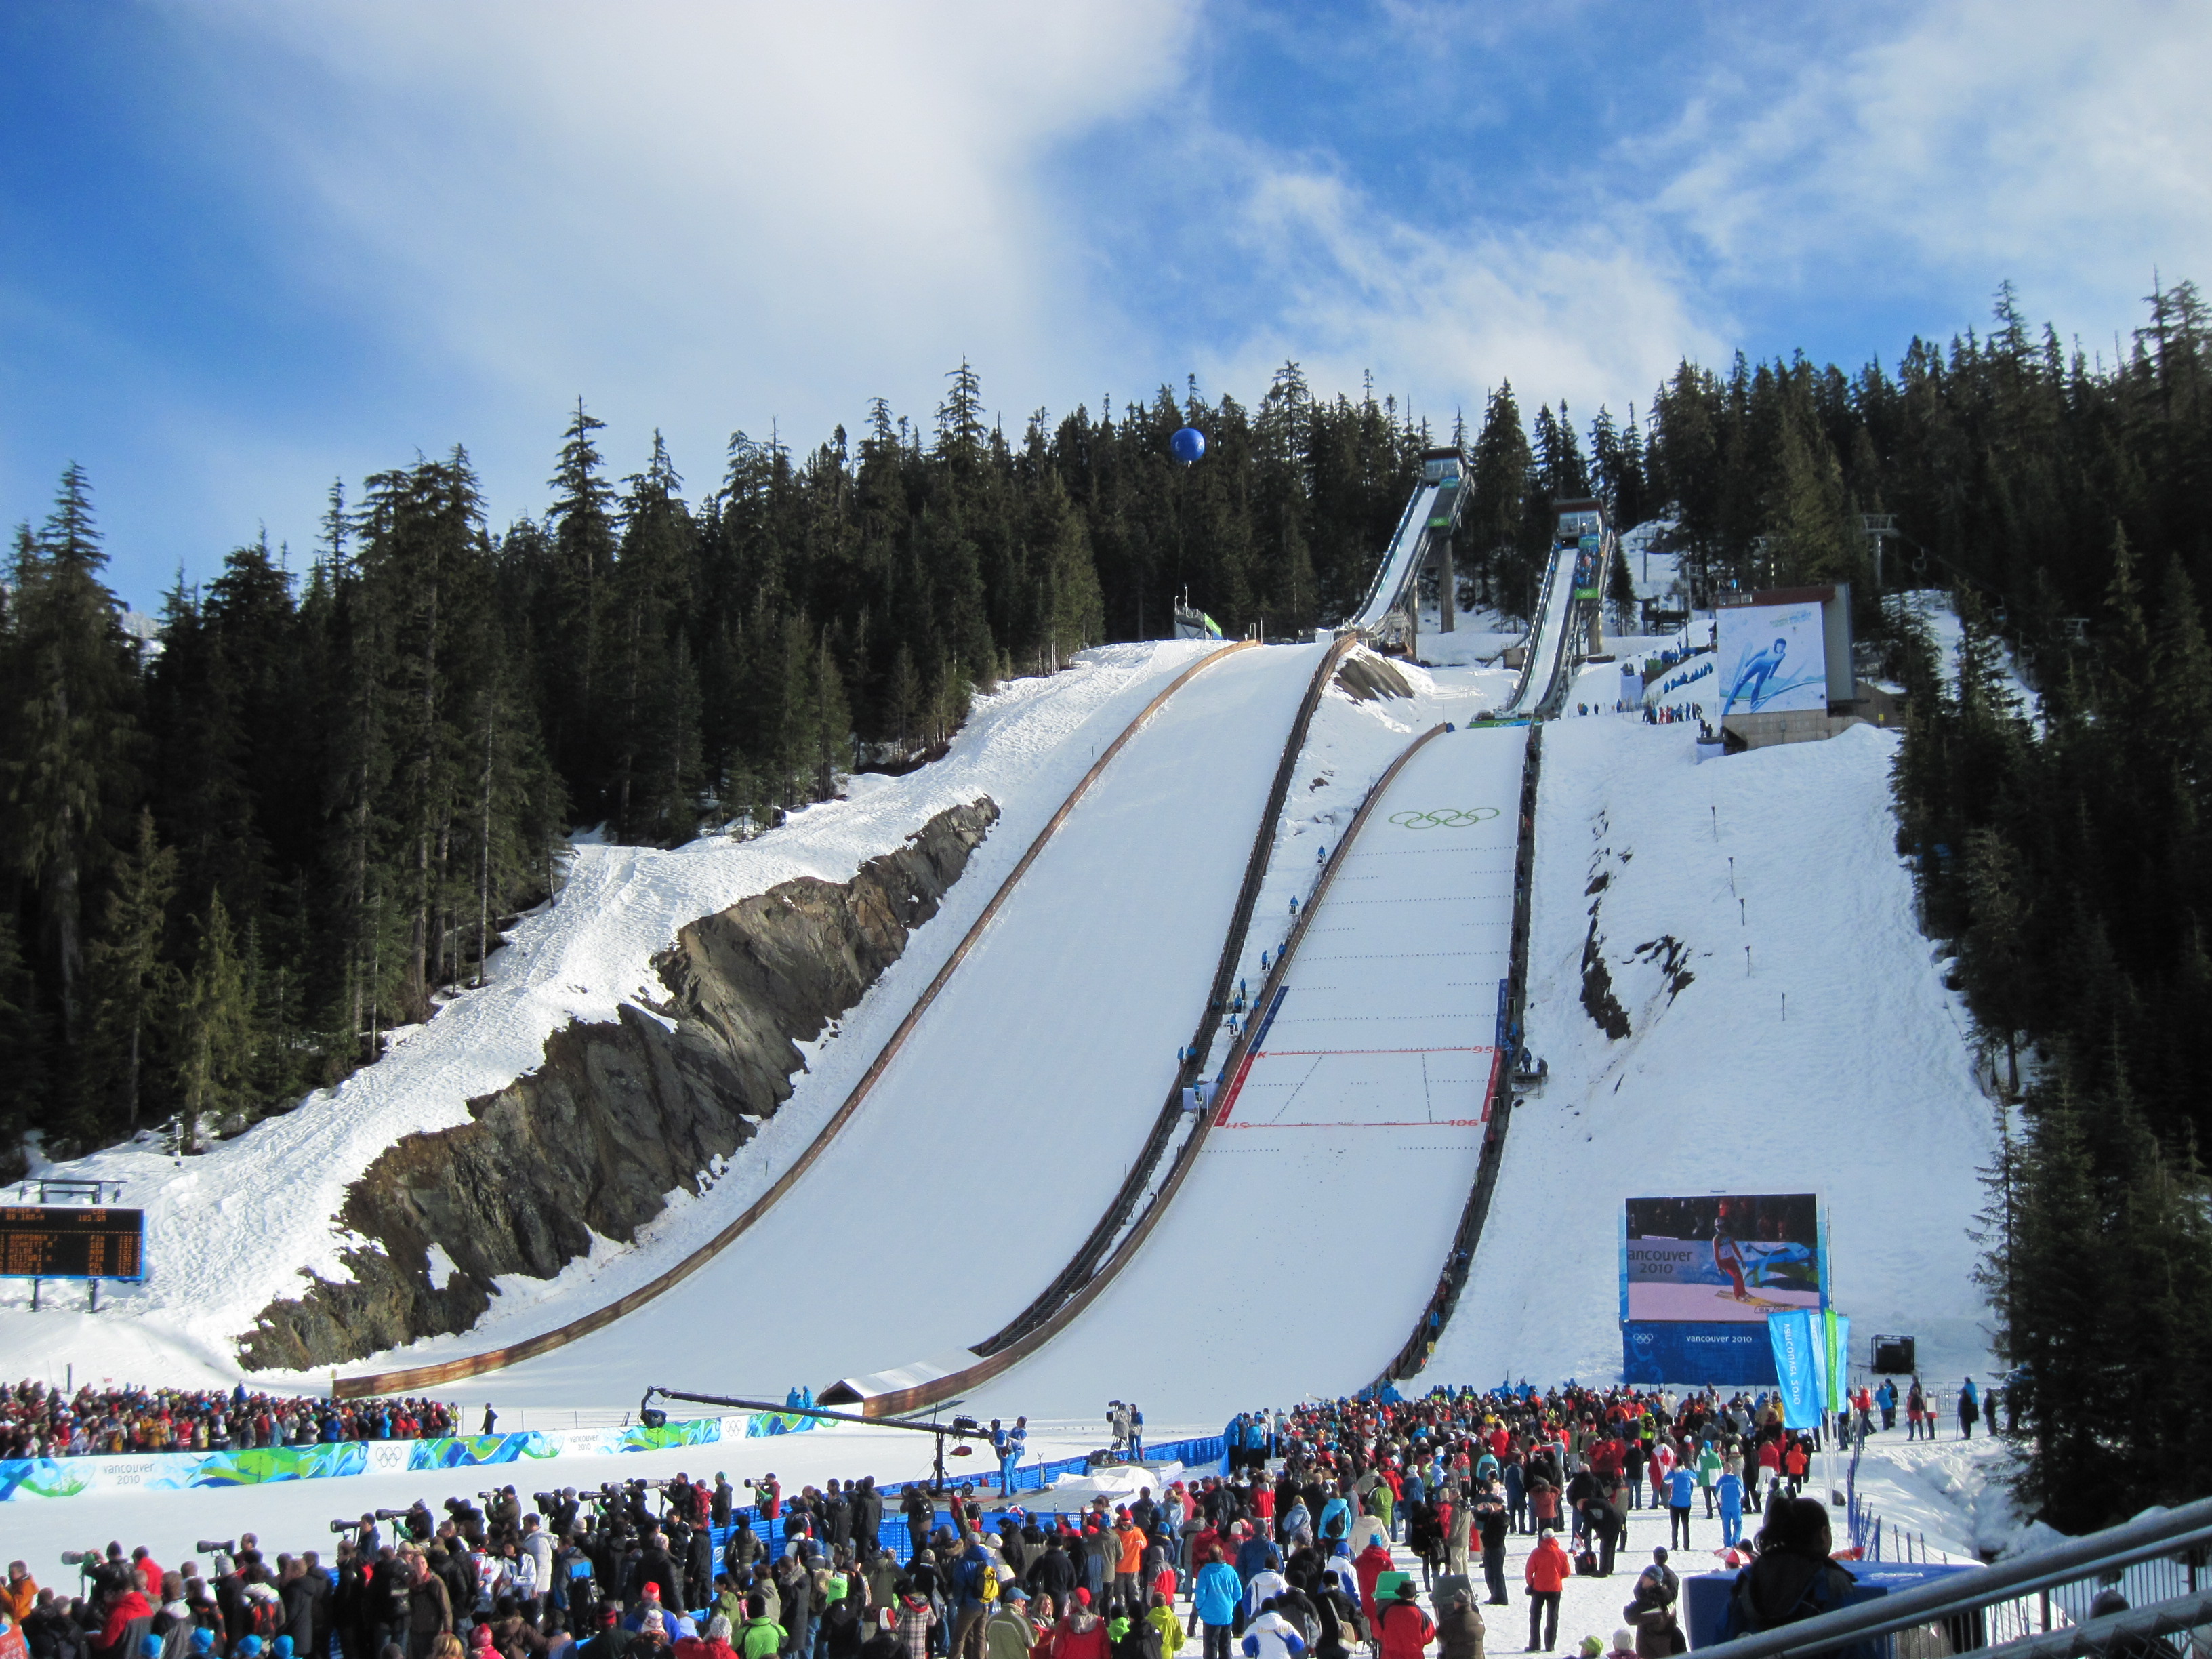 Fileski Jumping Hills Whistler 2 Wikimedia Commons within The Most Elegant in addition to Beautiful ski jump 8c pertaining to Your property